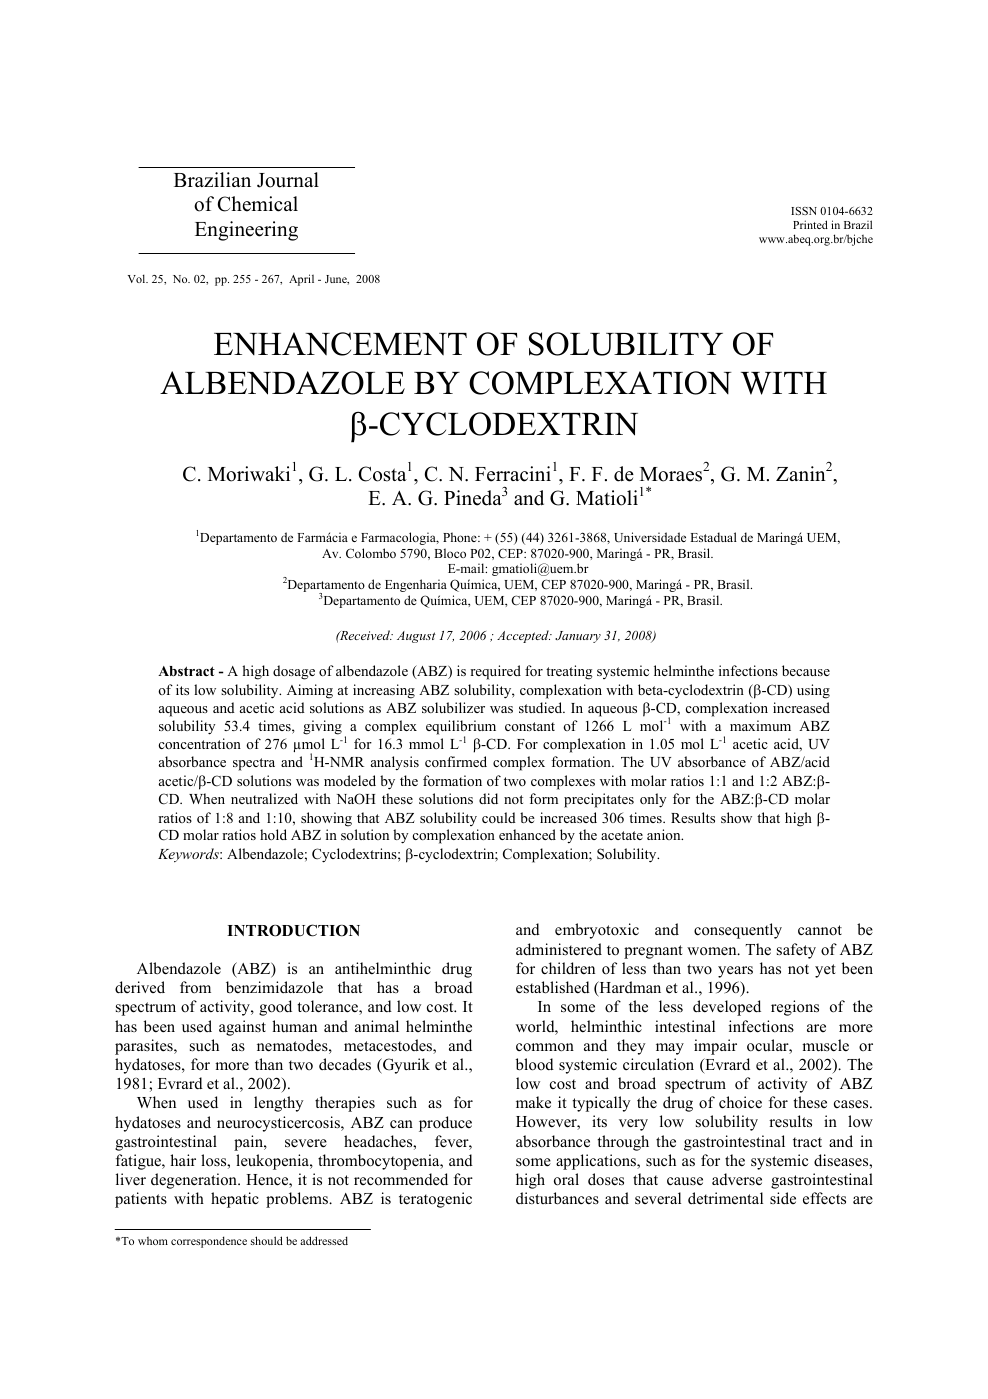 Enhancement Of Solubility Of Albendazole By Complexation With B Cyclodextrin Topic Of Research Paper In Chemical Sciences Download Scholarly Article Pdf And Read For Free On Cyberleninka Open Science Hub